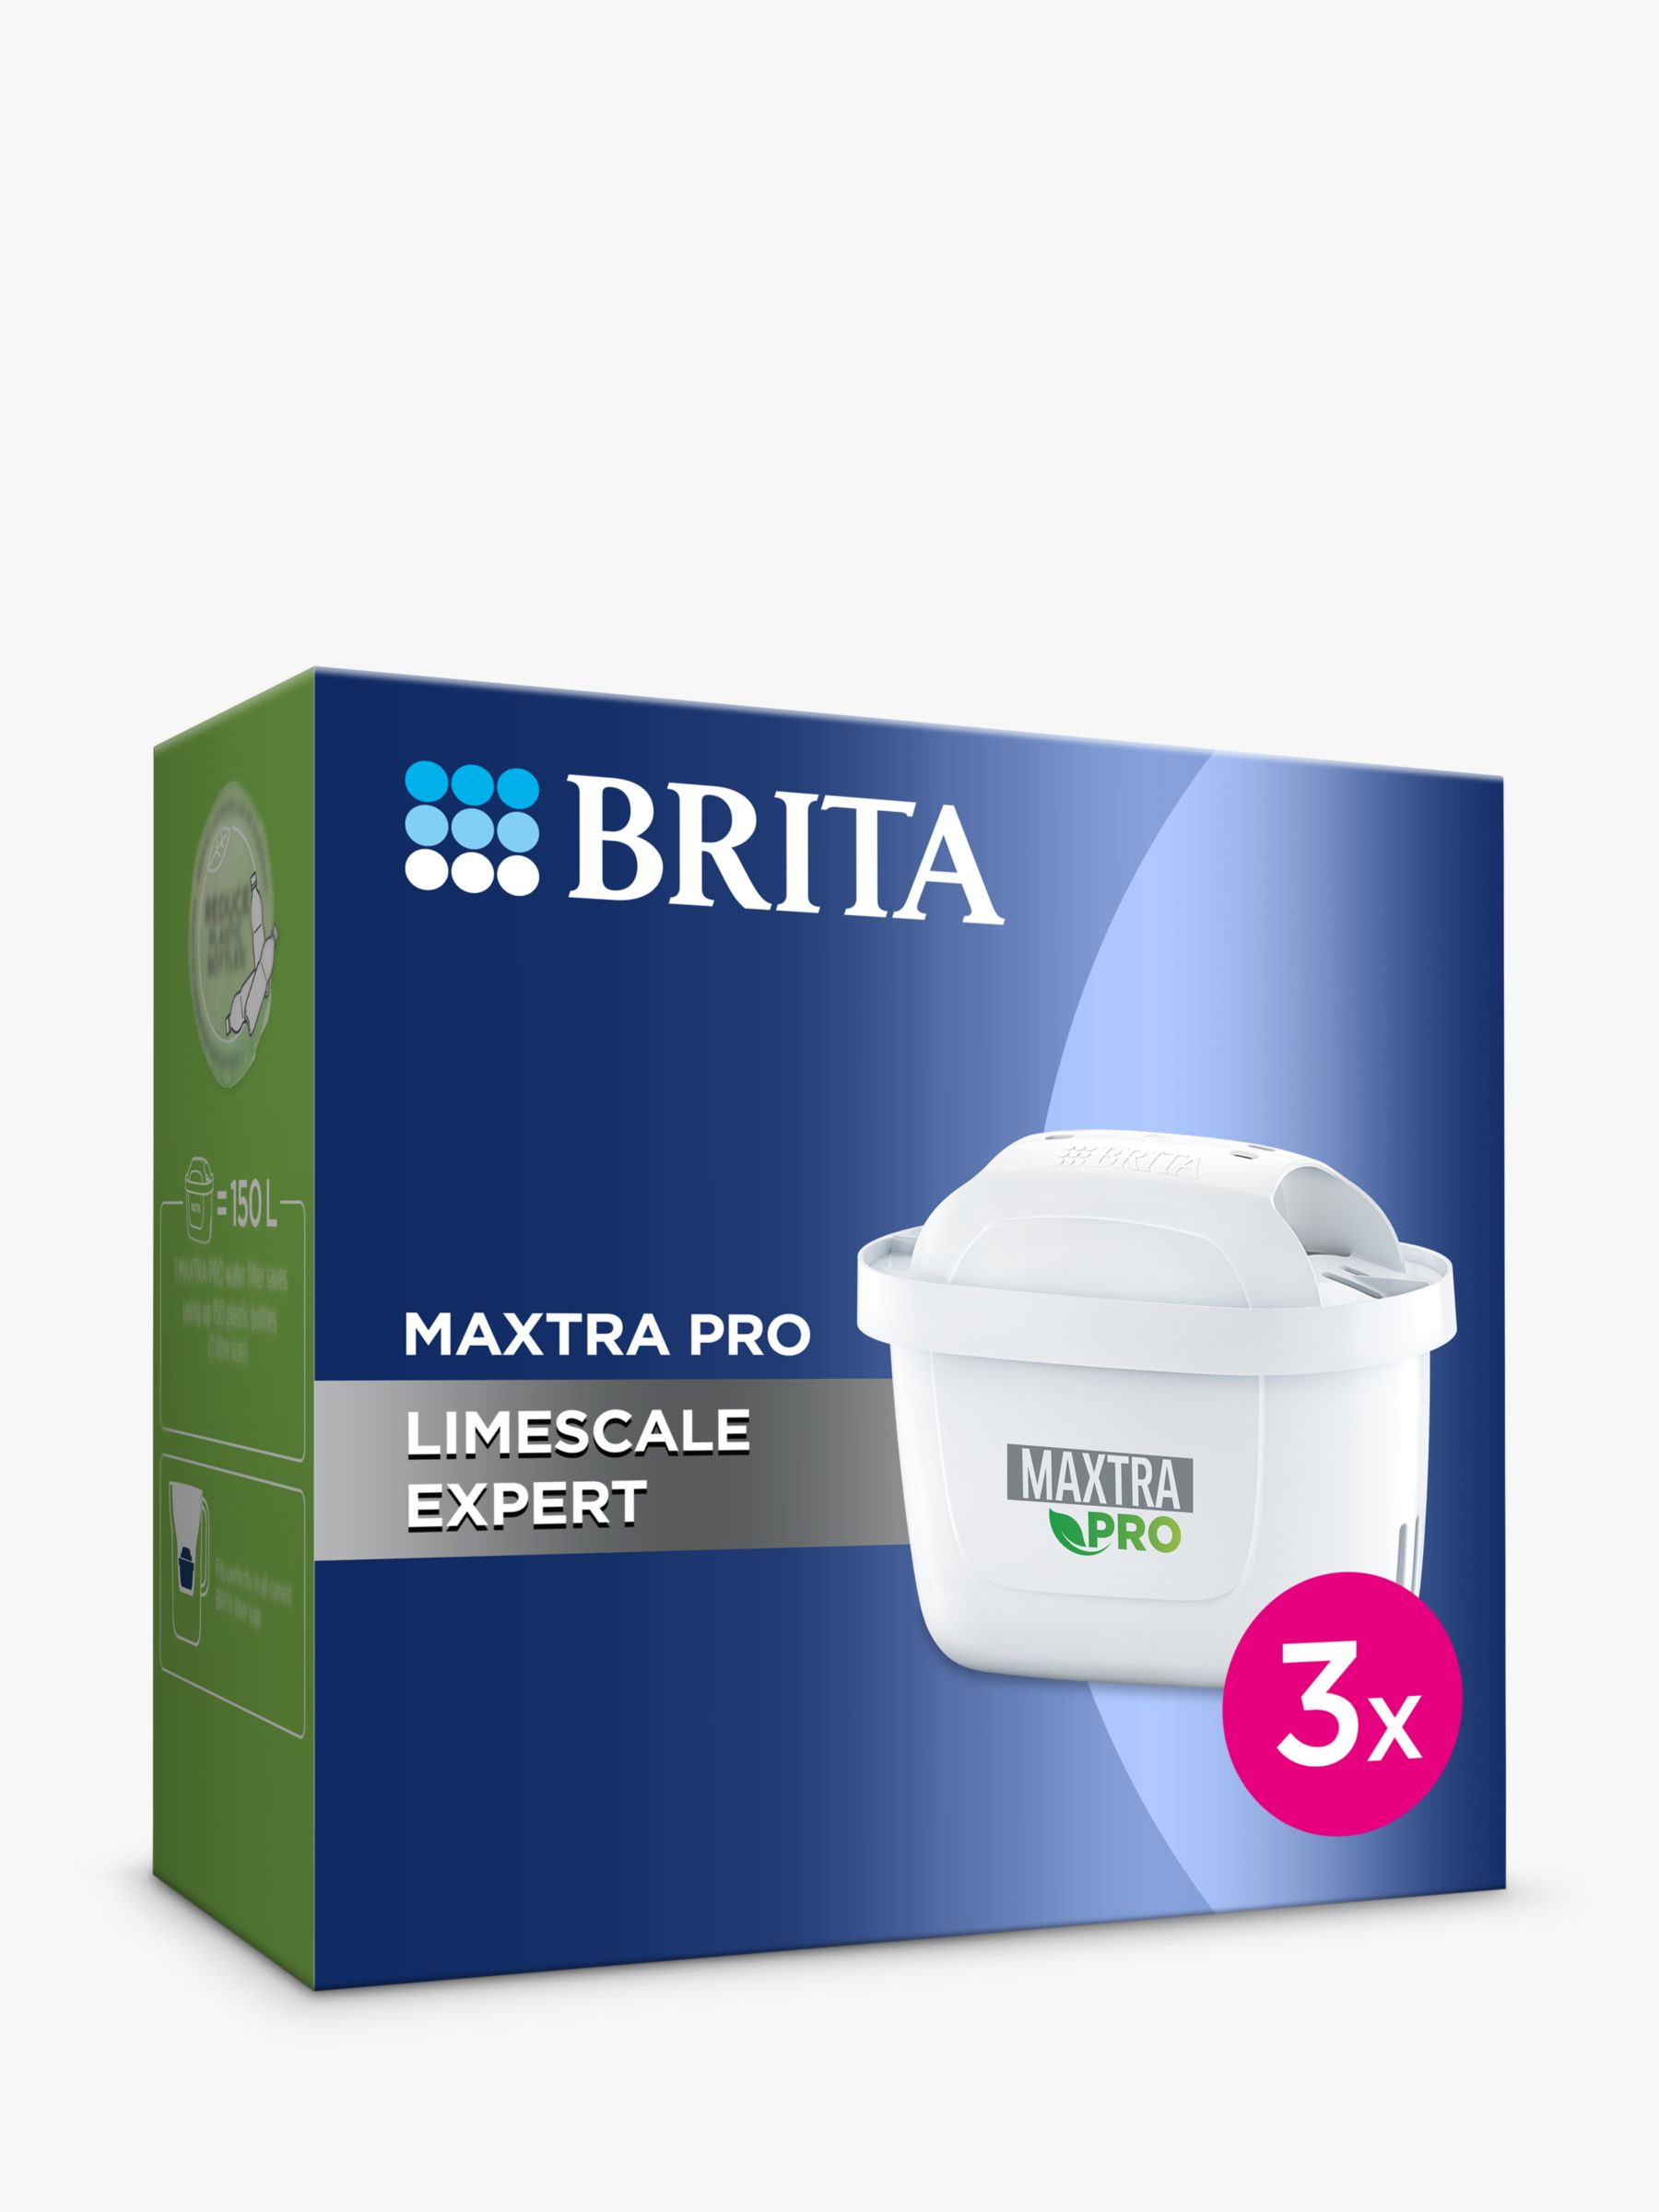 Pack 6 maxtra pro all in 1 (6 months) 1 unit